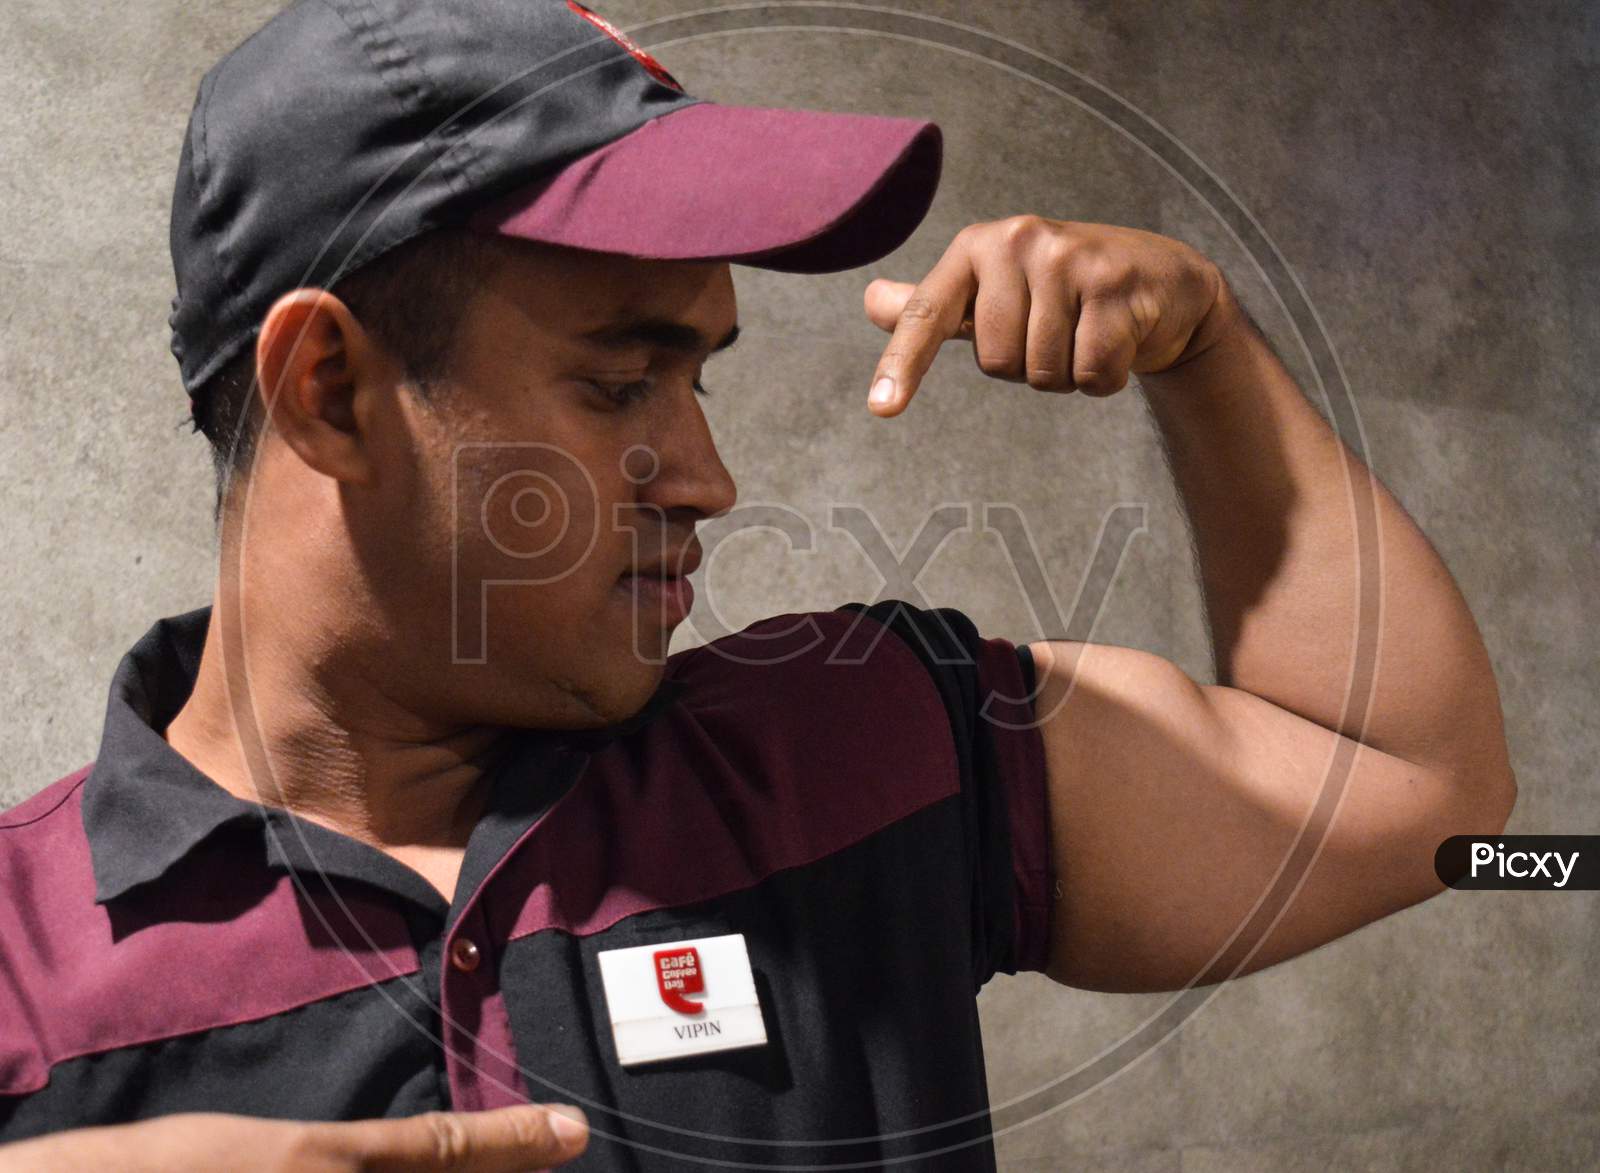 A Cafe Staff Showoff His Bicep In Cafe Uniform At Cafe Indoor.